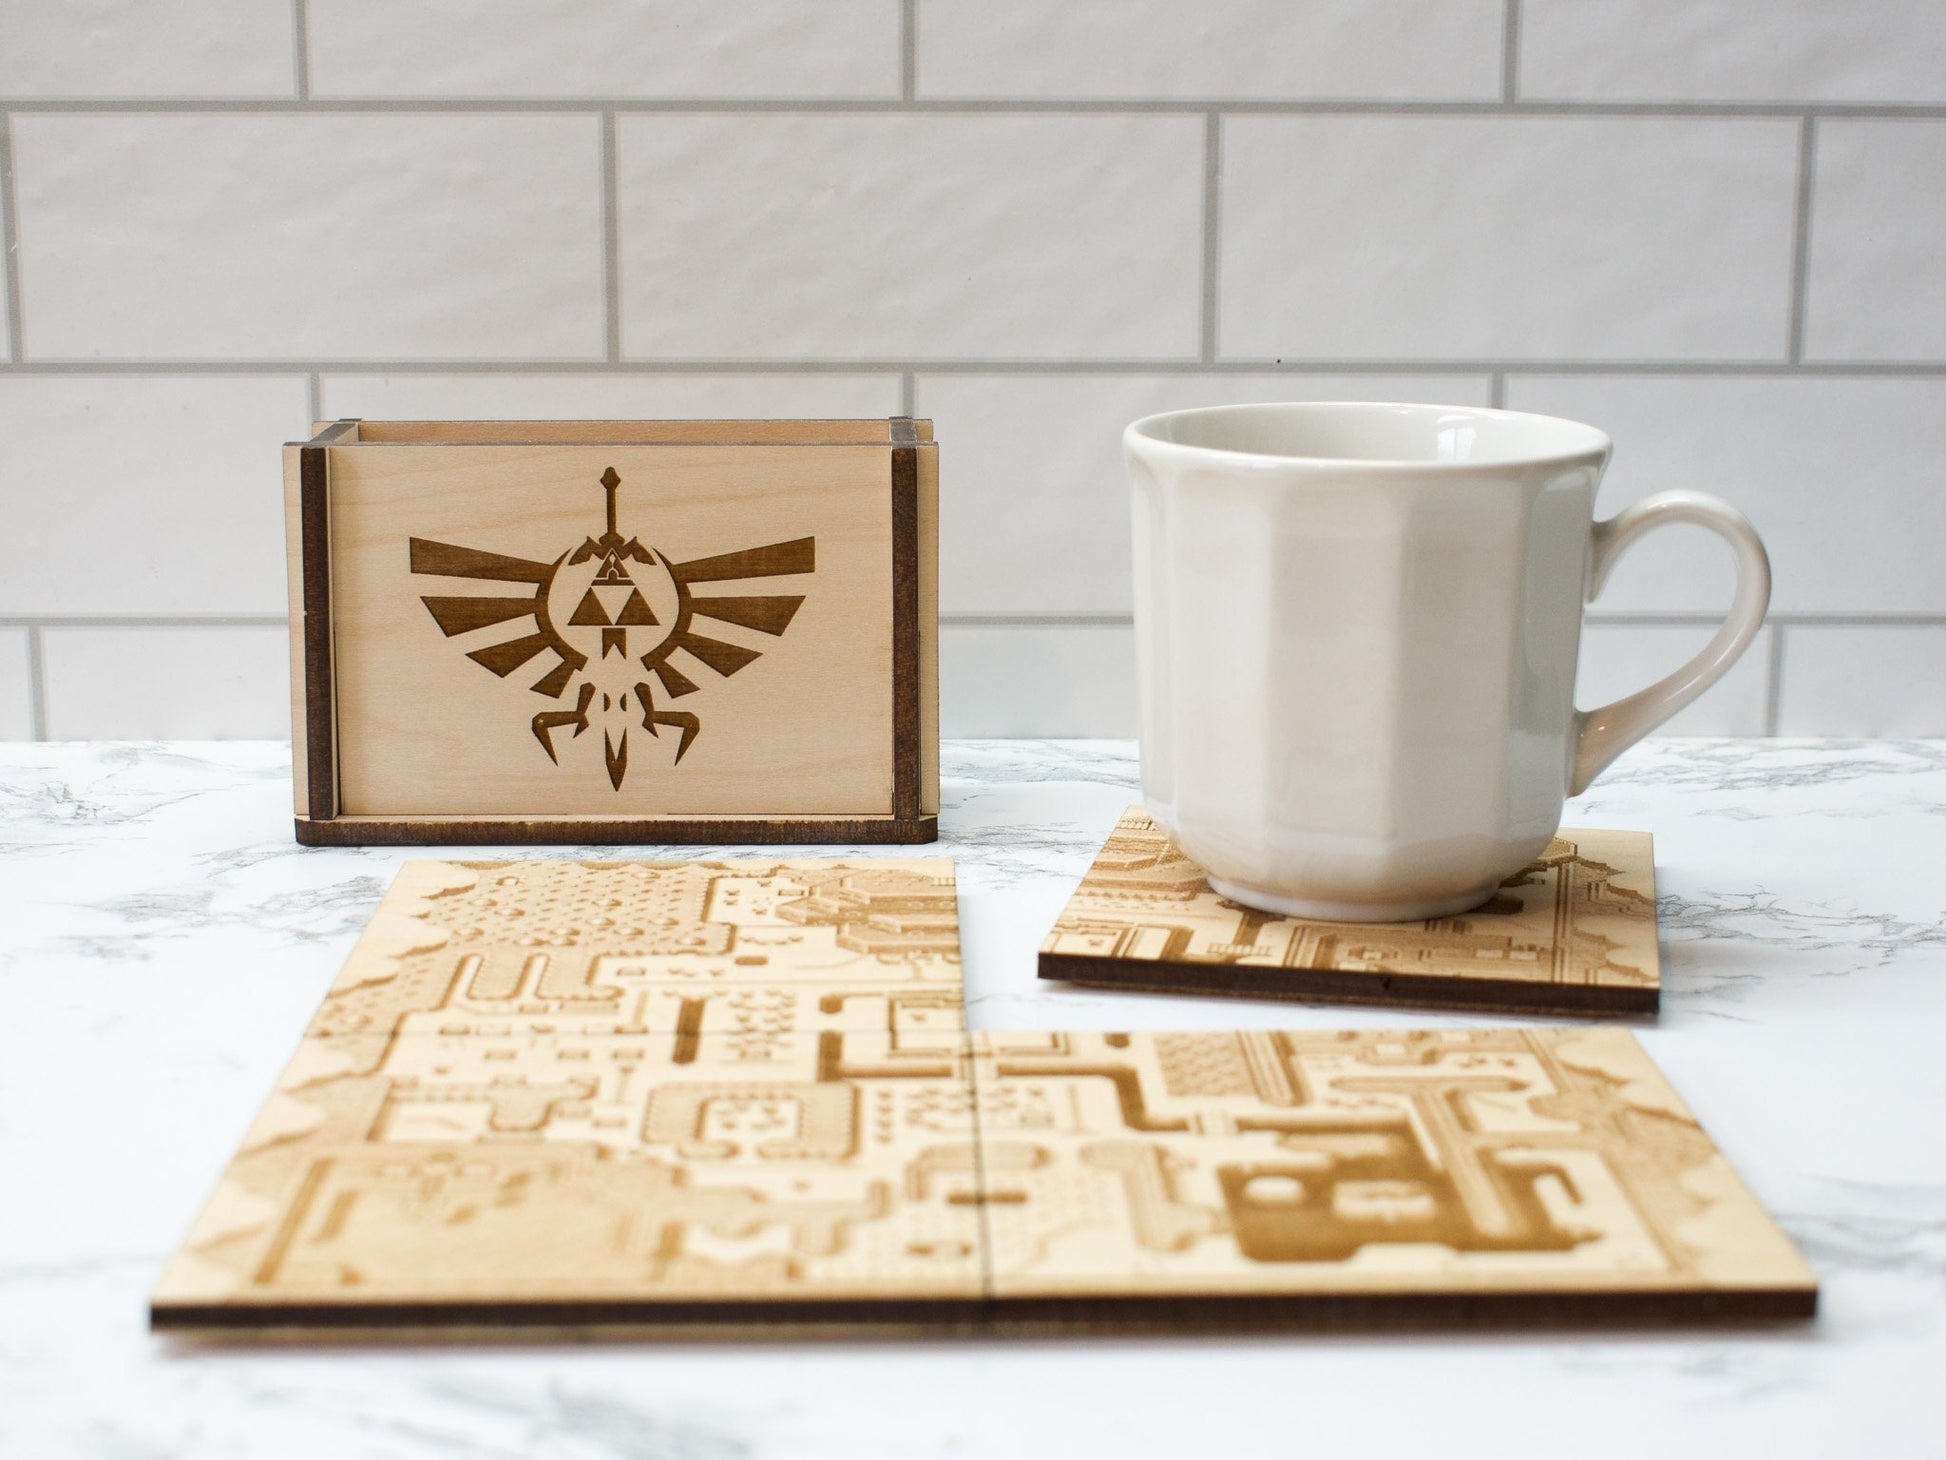 Legend of Zelda Link to the Past Map Coasters, Zelda Decor, Legend of Zelda Game Coasters